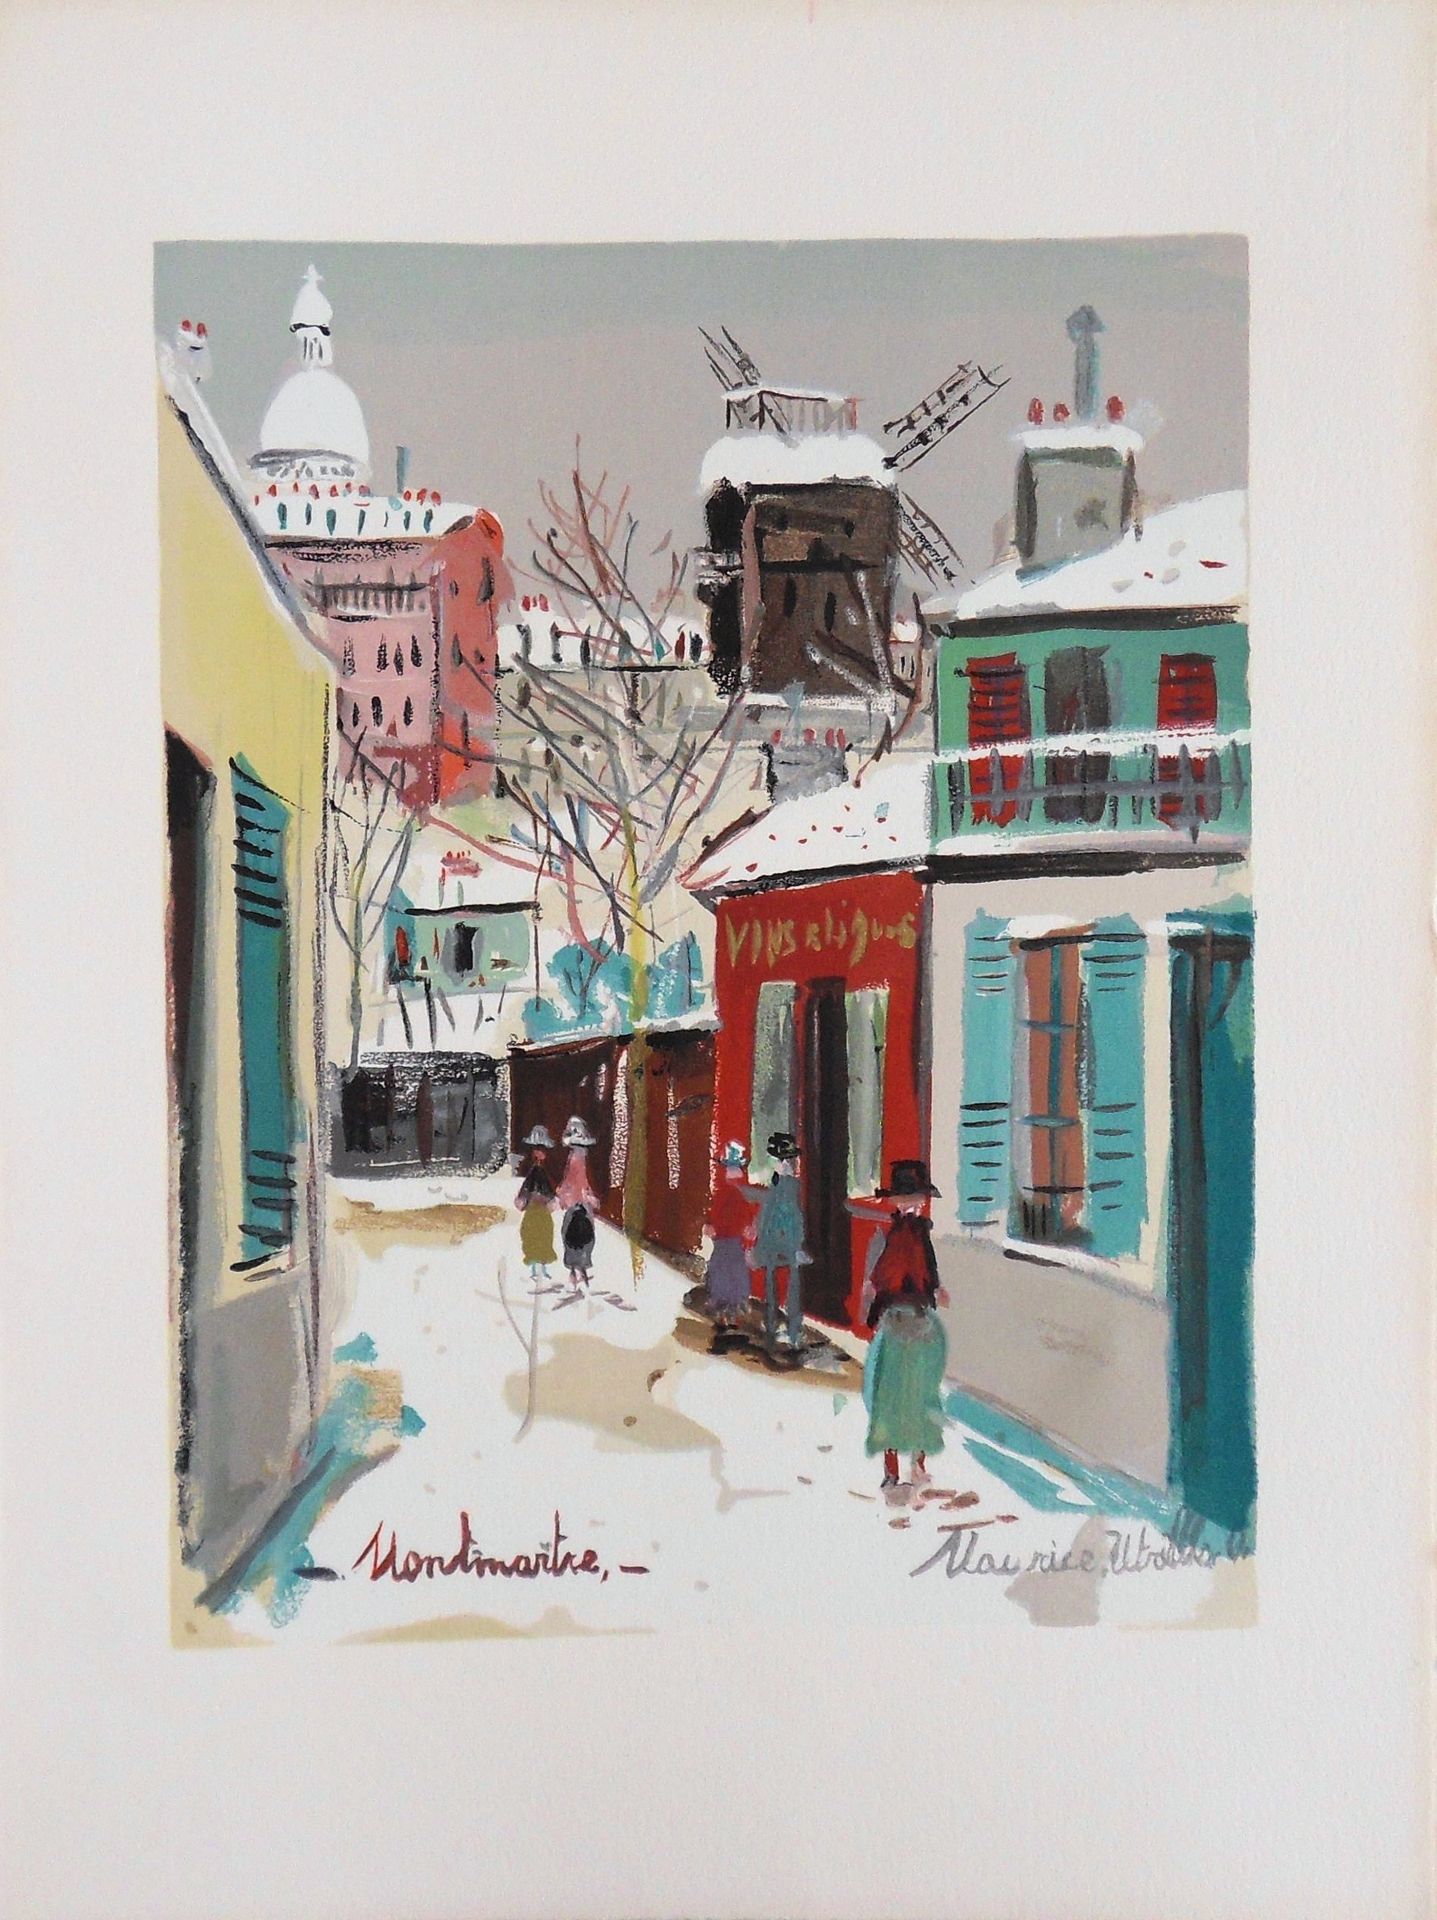 Maurice Utrillo Maurice UTRILLO (after)

Montmartre : Sacre Coeur Church and Mou&hellip;